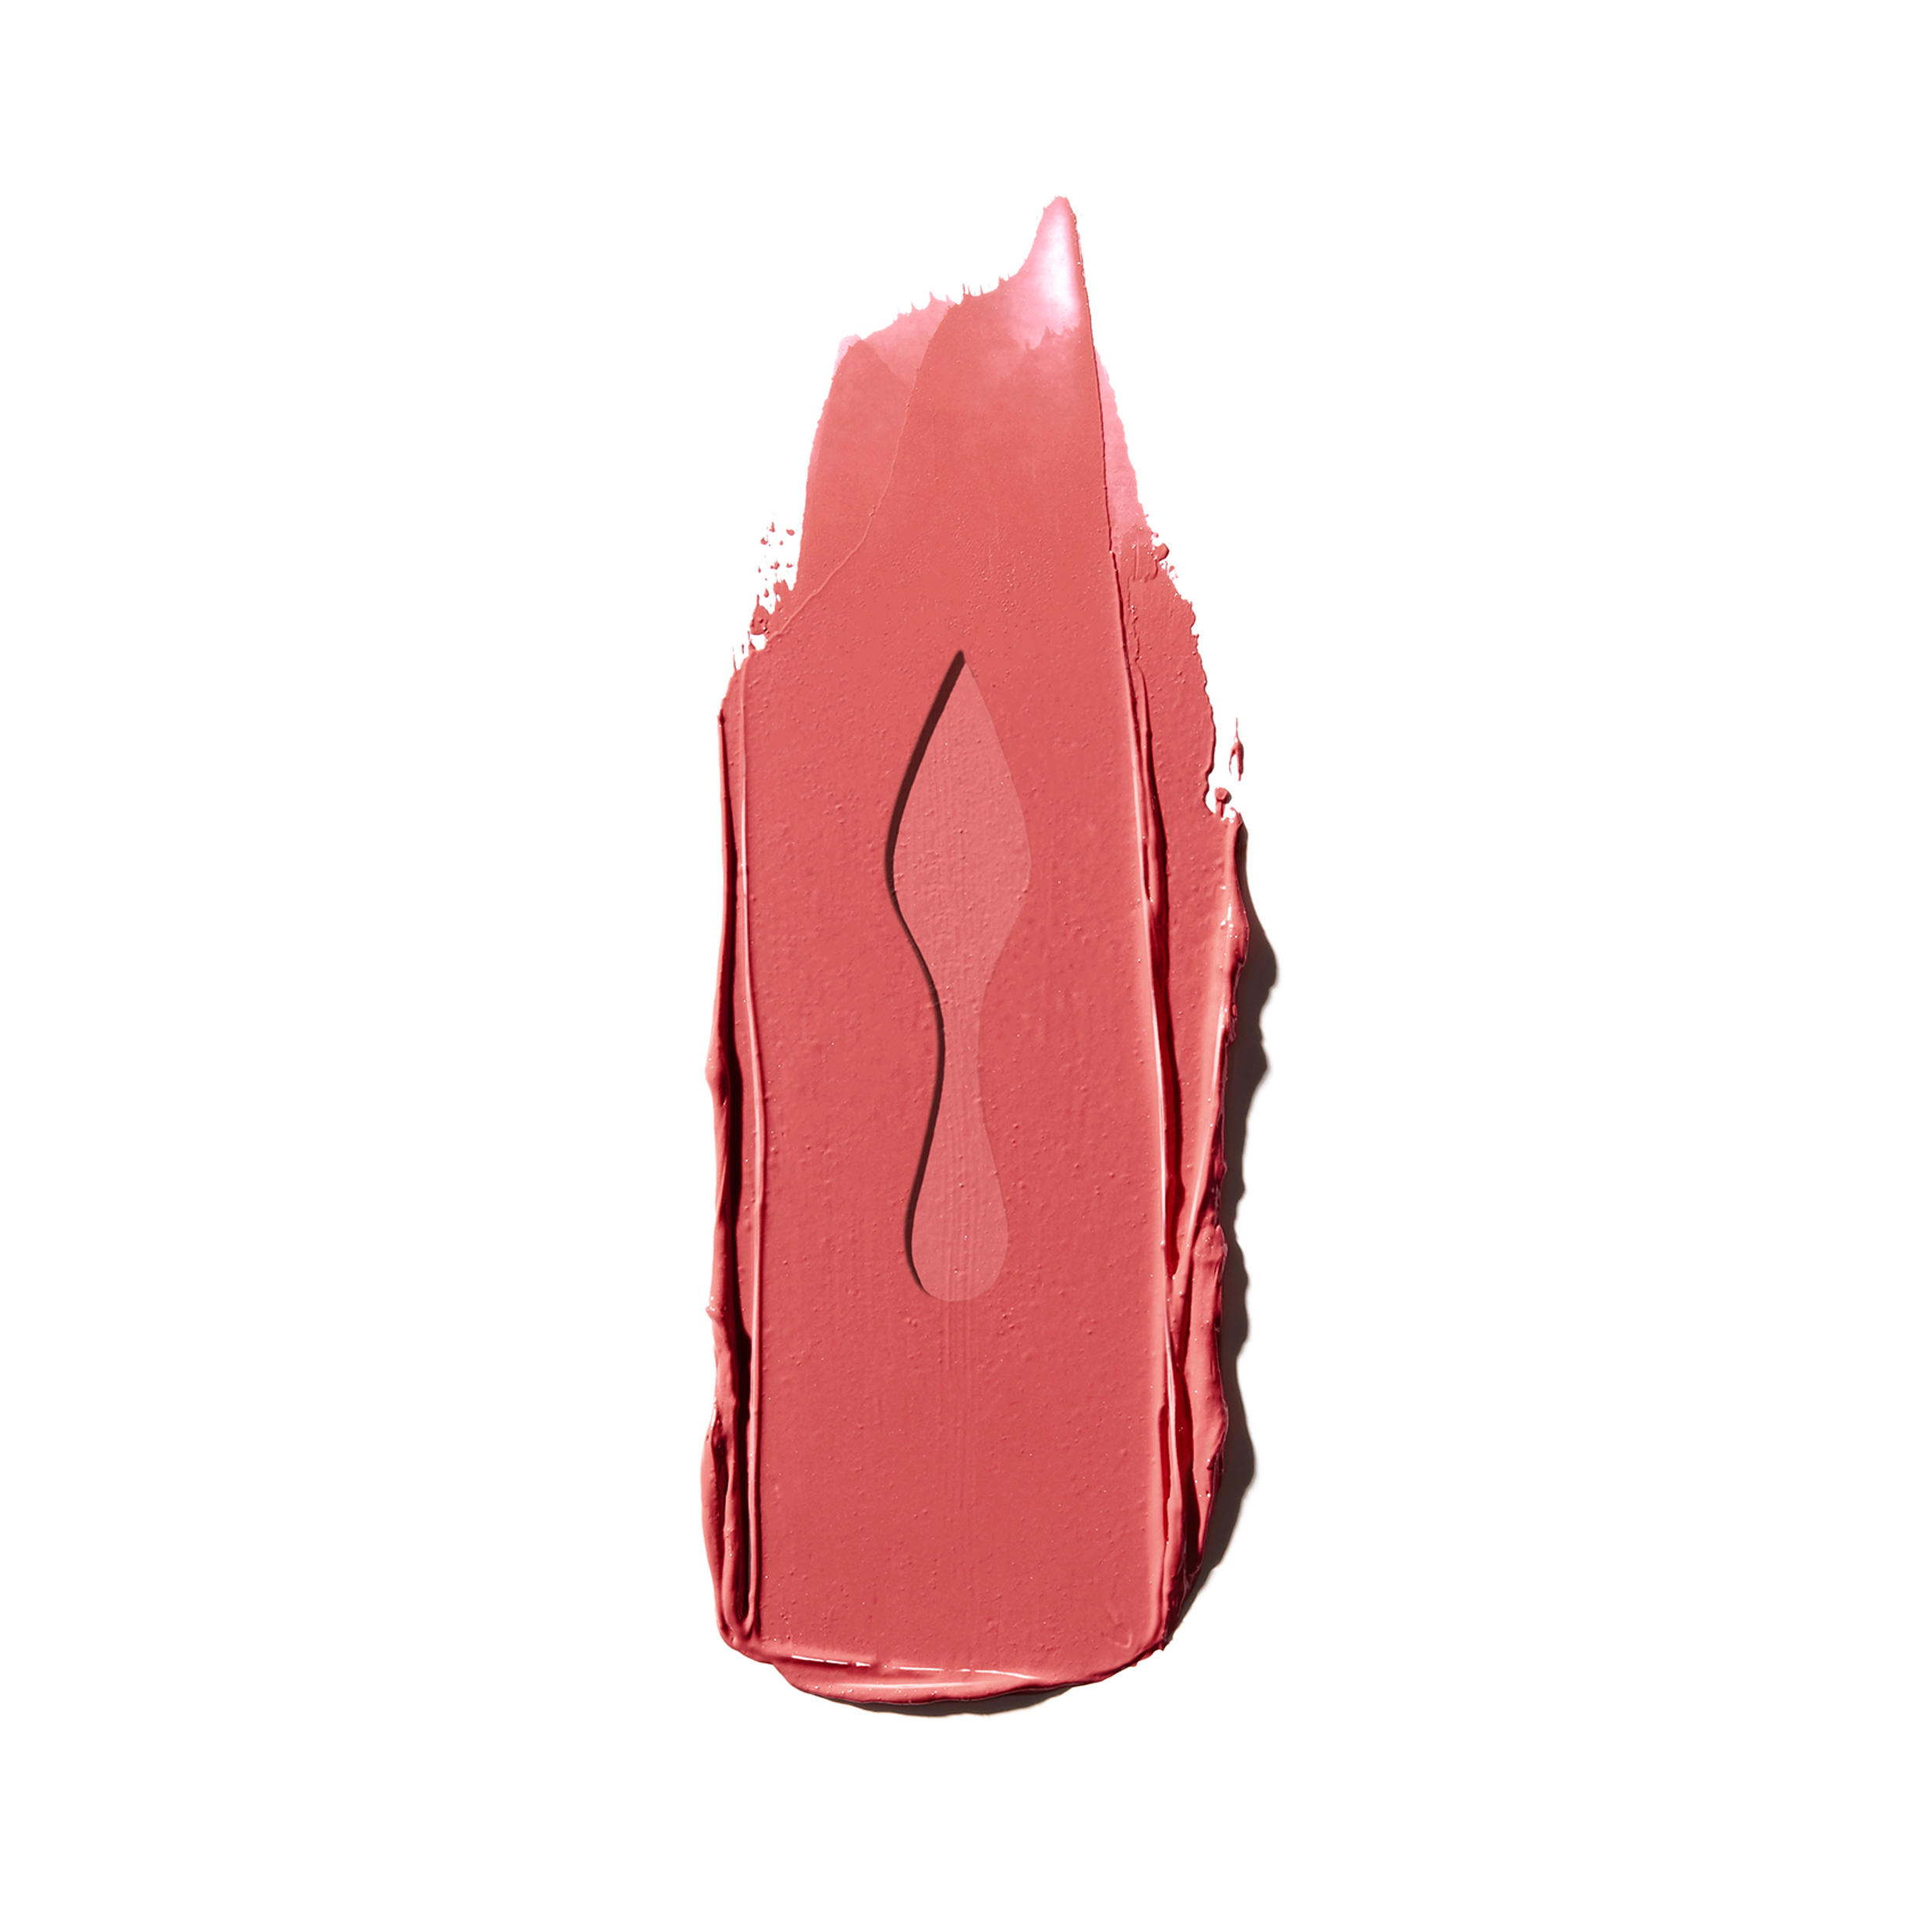 Christian Louboutin Silky Satin Lip Colour in Belly Bloom review